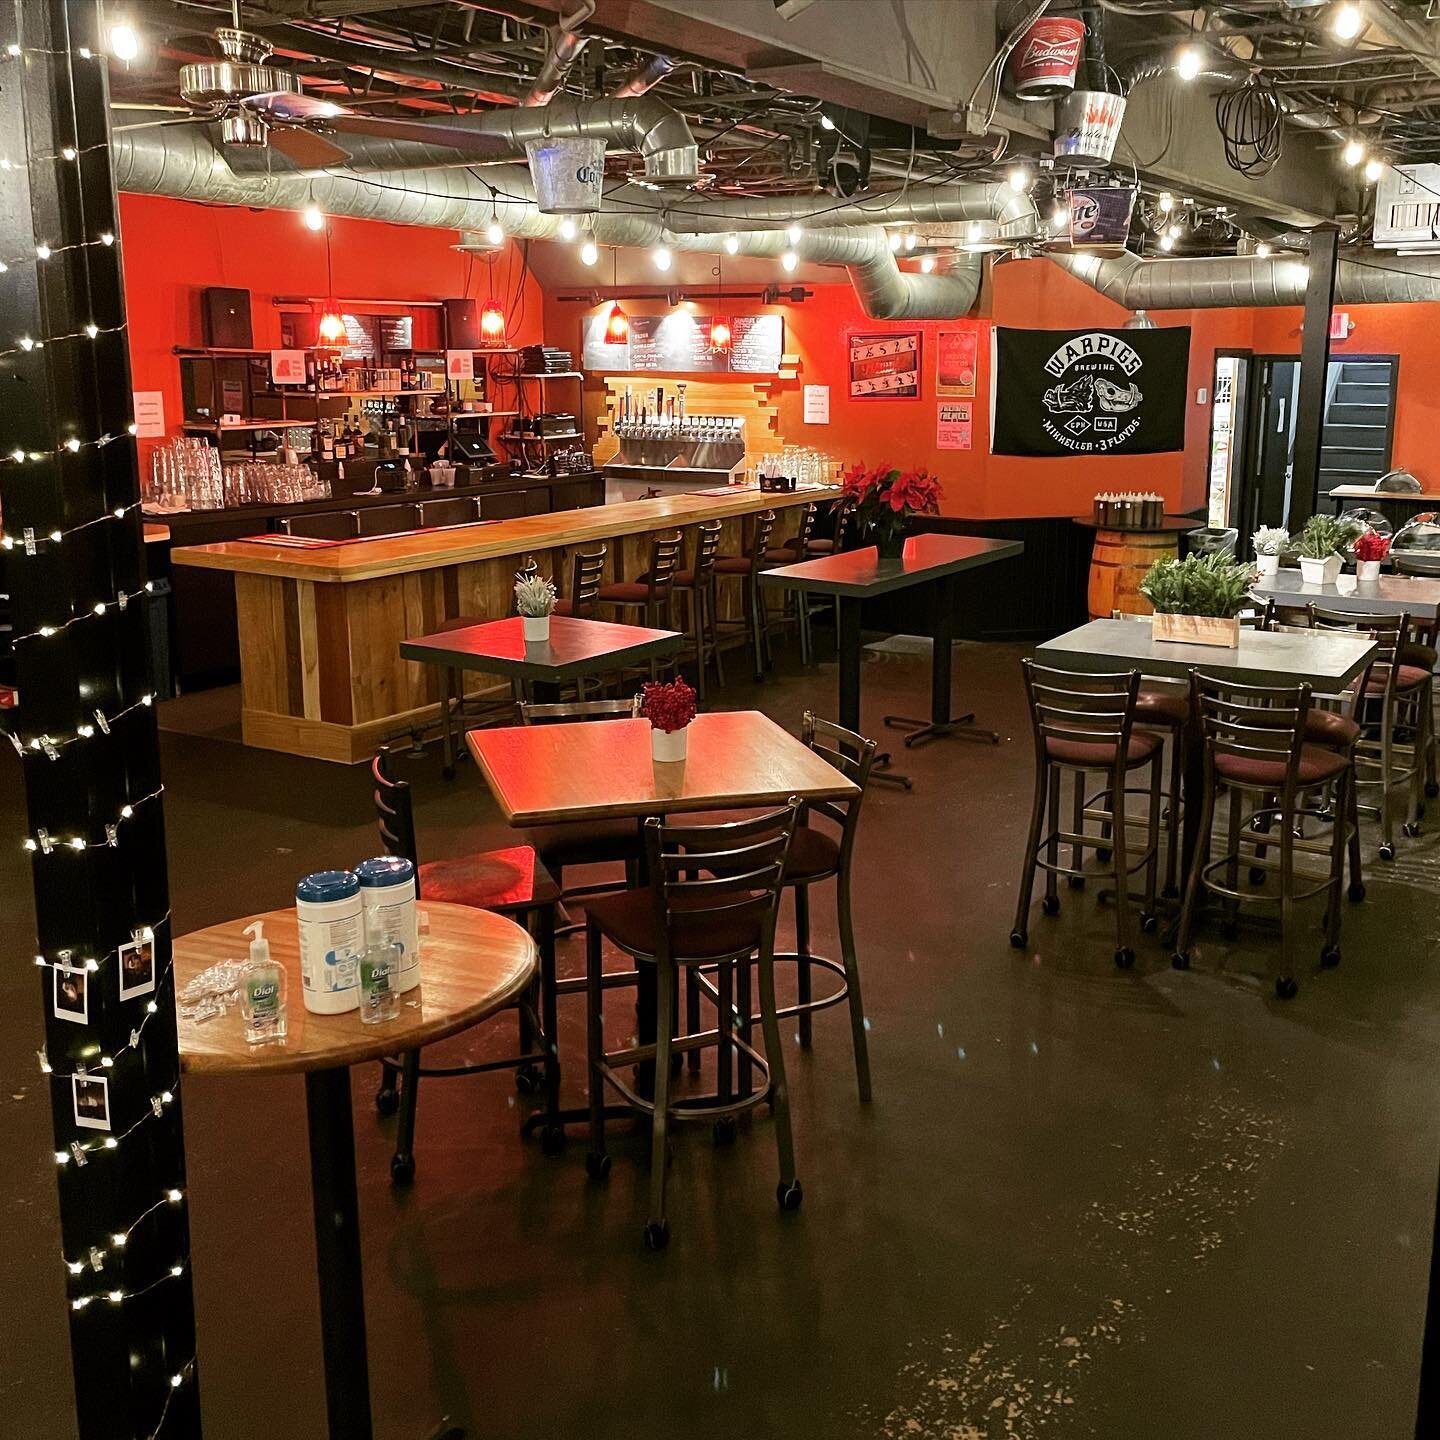 Do you need somewhere to host your holiday party? The Belly of the Beast is the perfect spot. You will have your own floor with a bar, stage, games, and plenty of seating. We can work with you to create a menu and set up electronics as needed!
#event